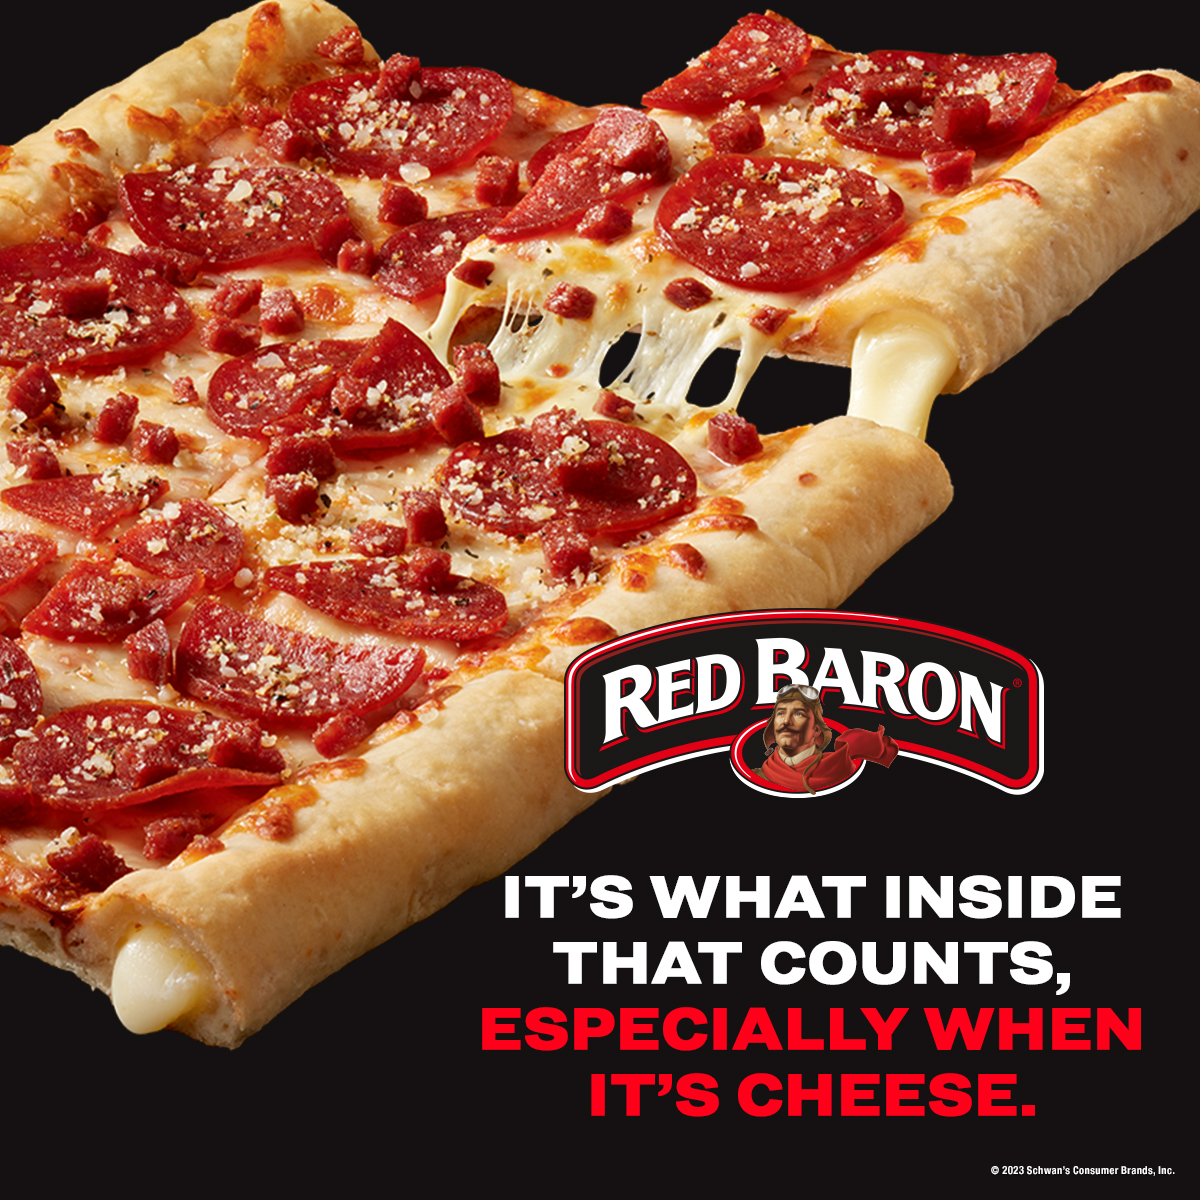 RED BARON® It's what inside that counts, especially when it's cheese.